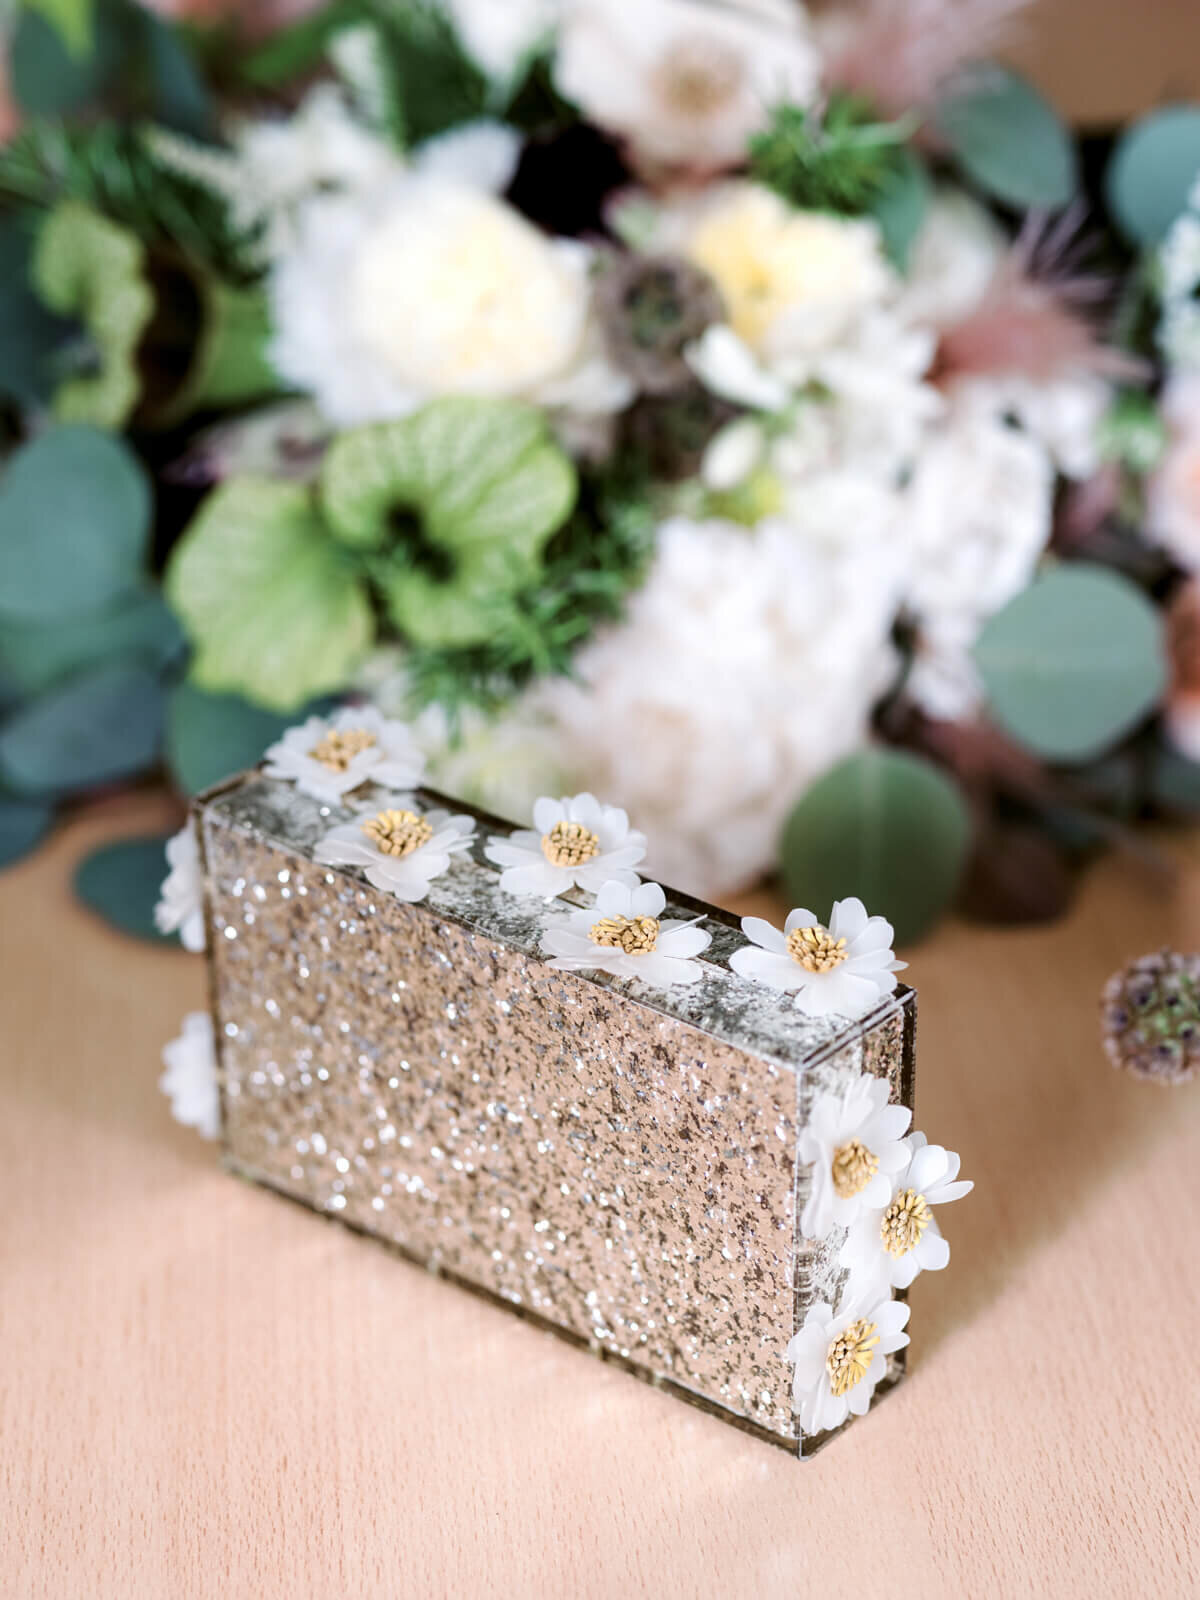 A brown, rectangular case with flowers on the sides and a bouquet of flowers in the background